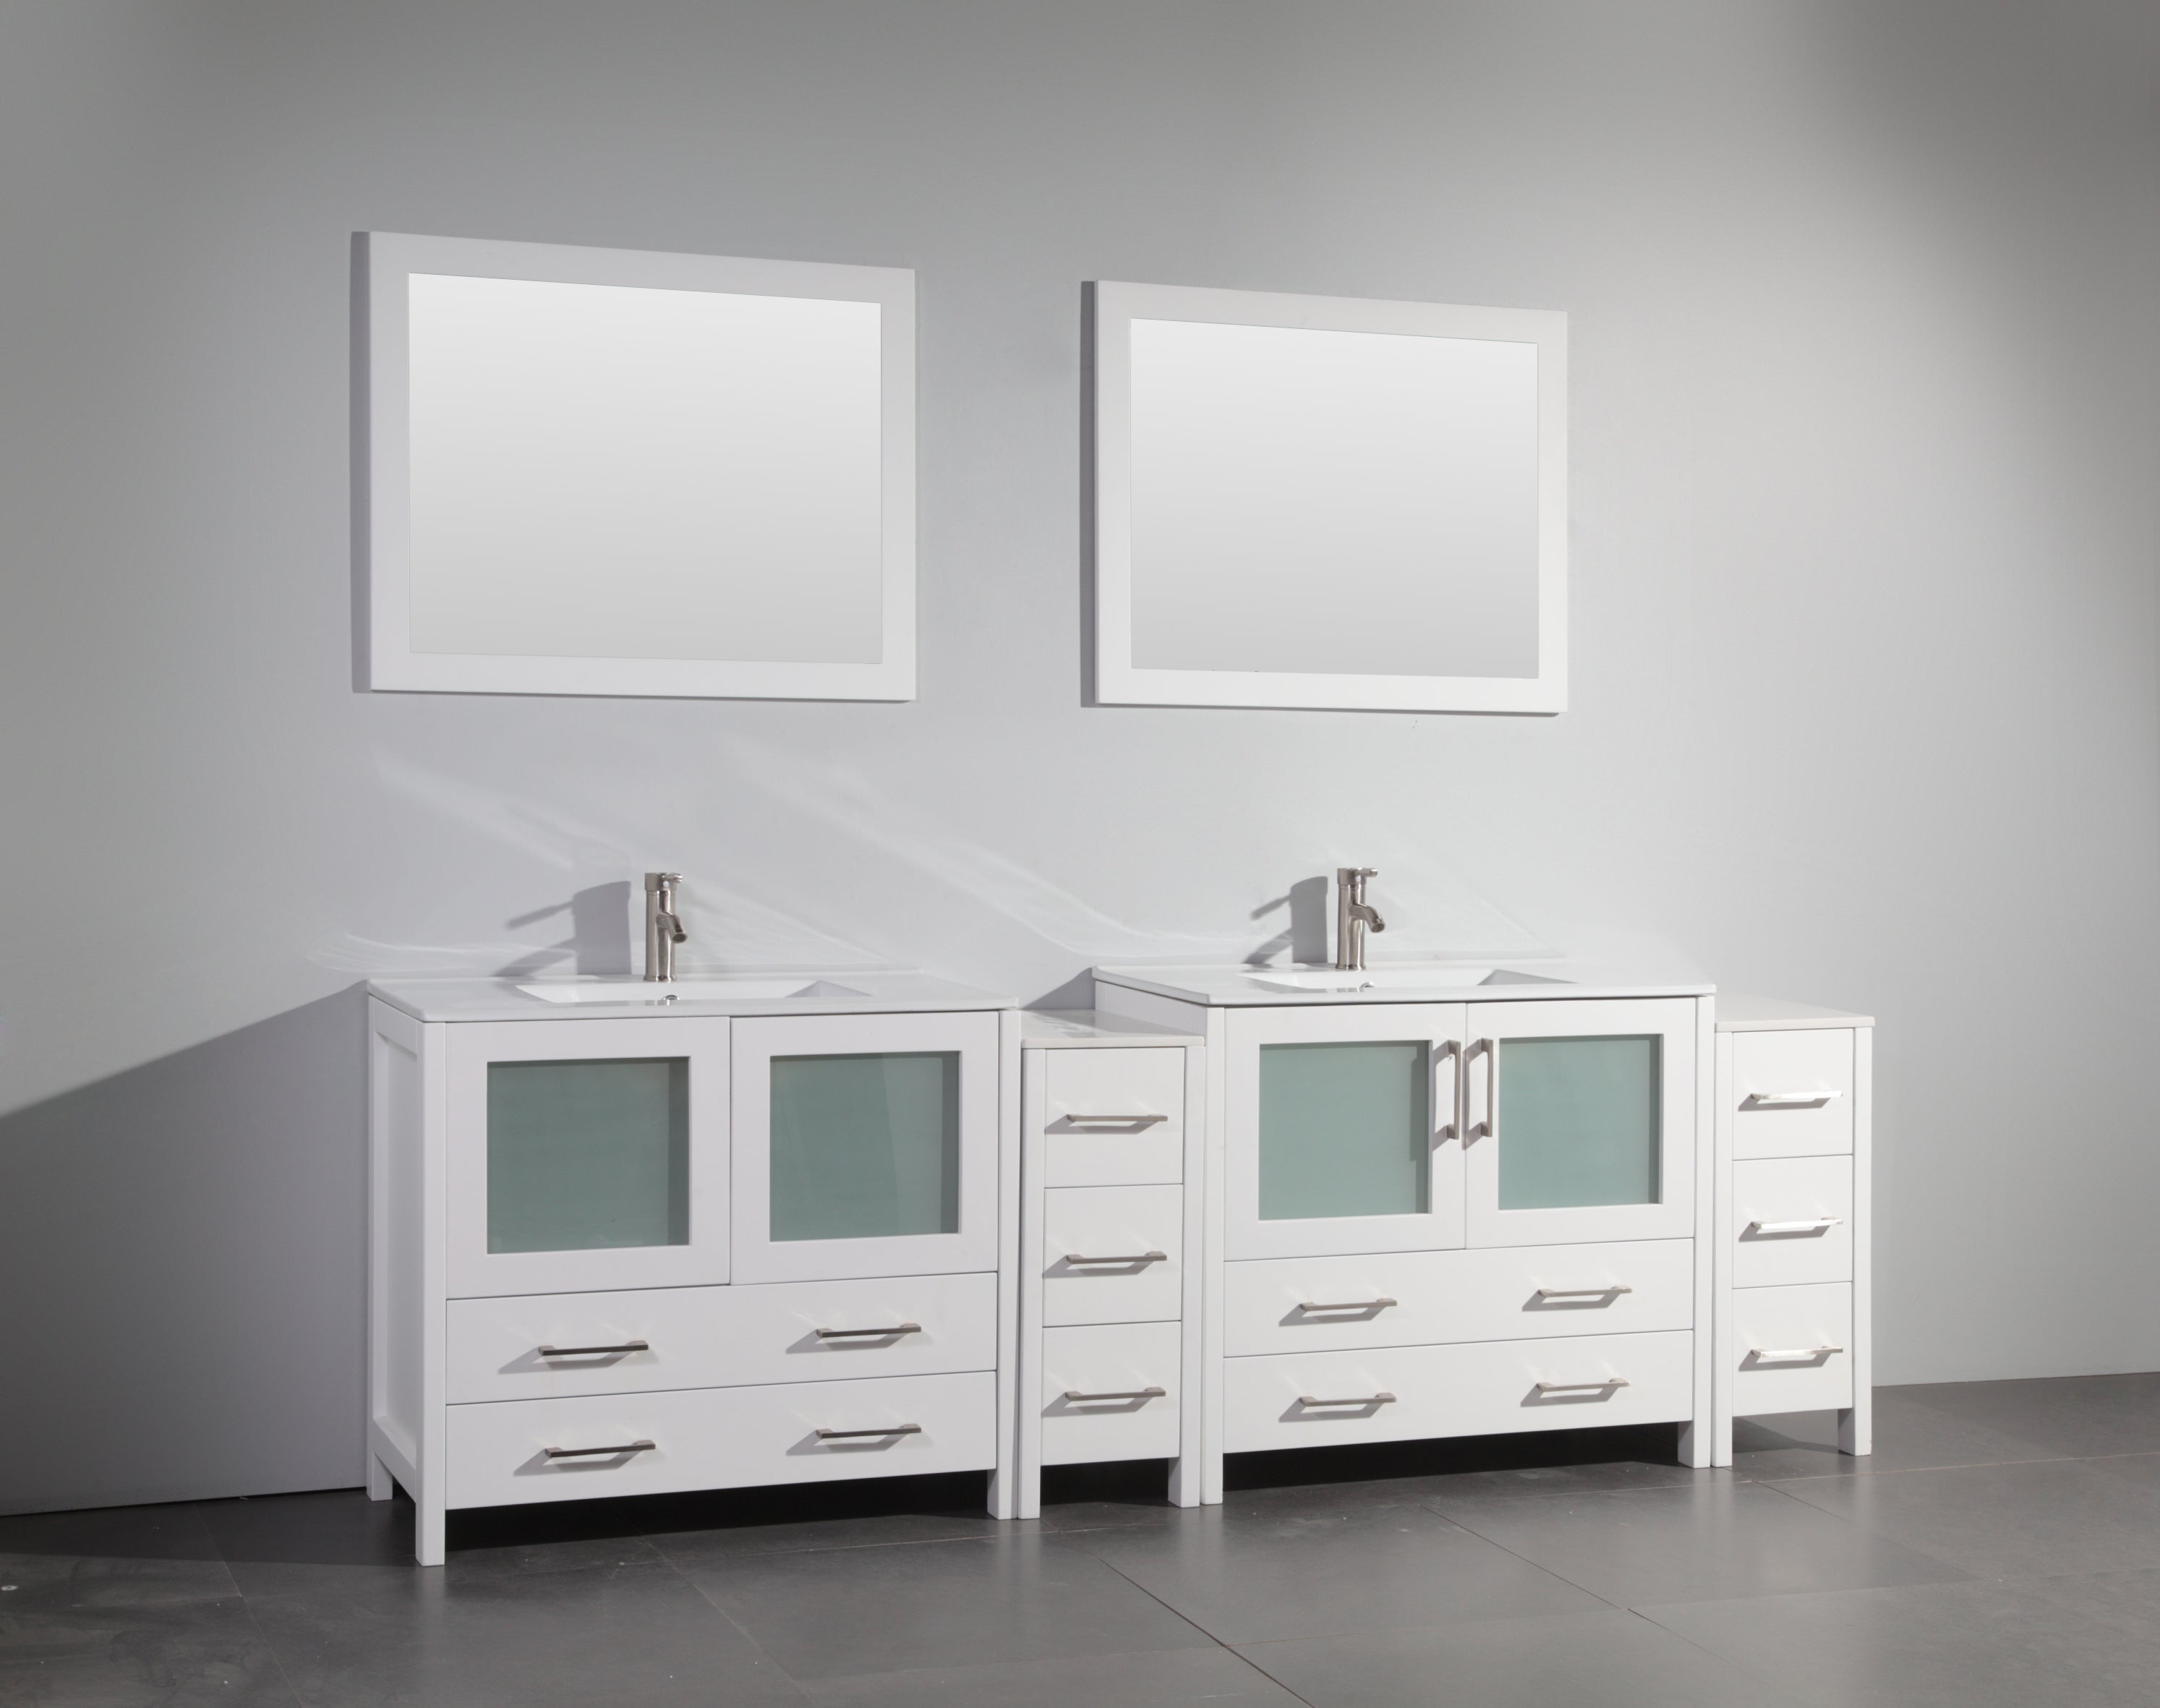 Vanity Art - London 96" Double Sink Bathroom Vanity Set with Sink and Mirrors - 2 Side Cabinets - Bhdepot 